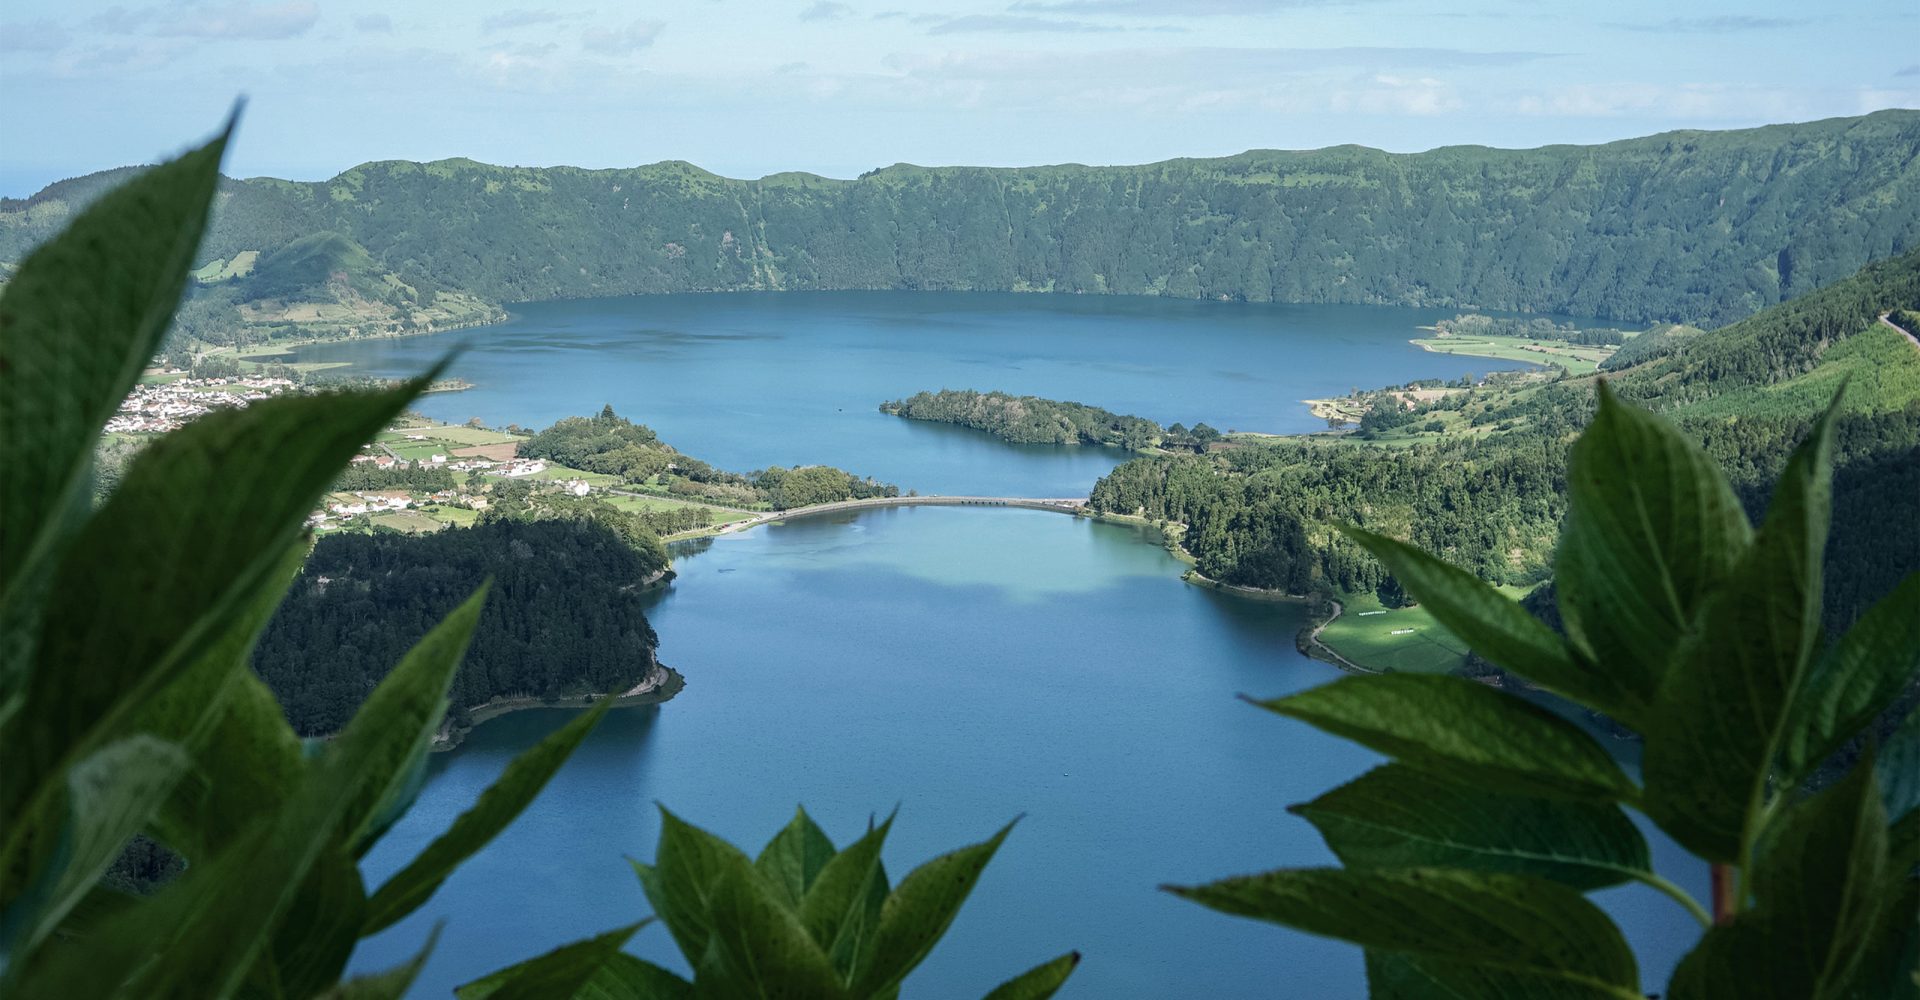 Incredibly green scenery, vibrant blue and green volcanic crater lakes